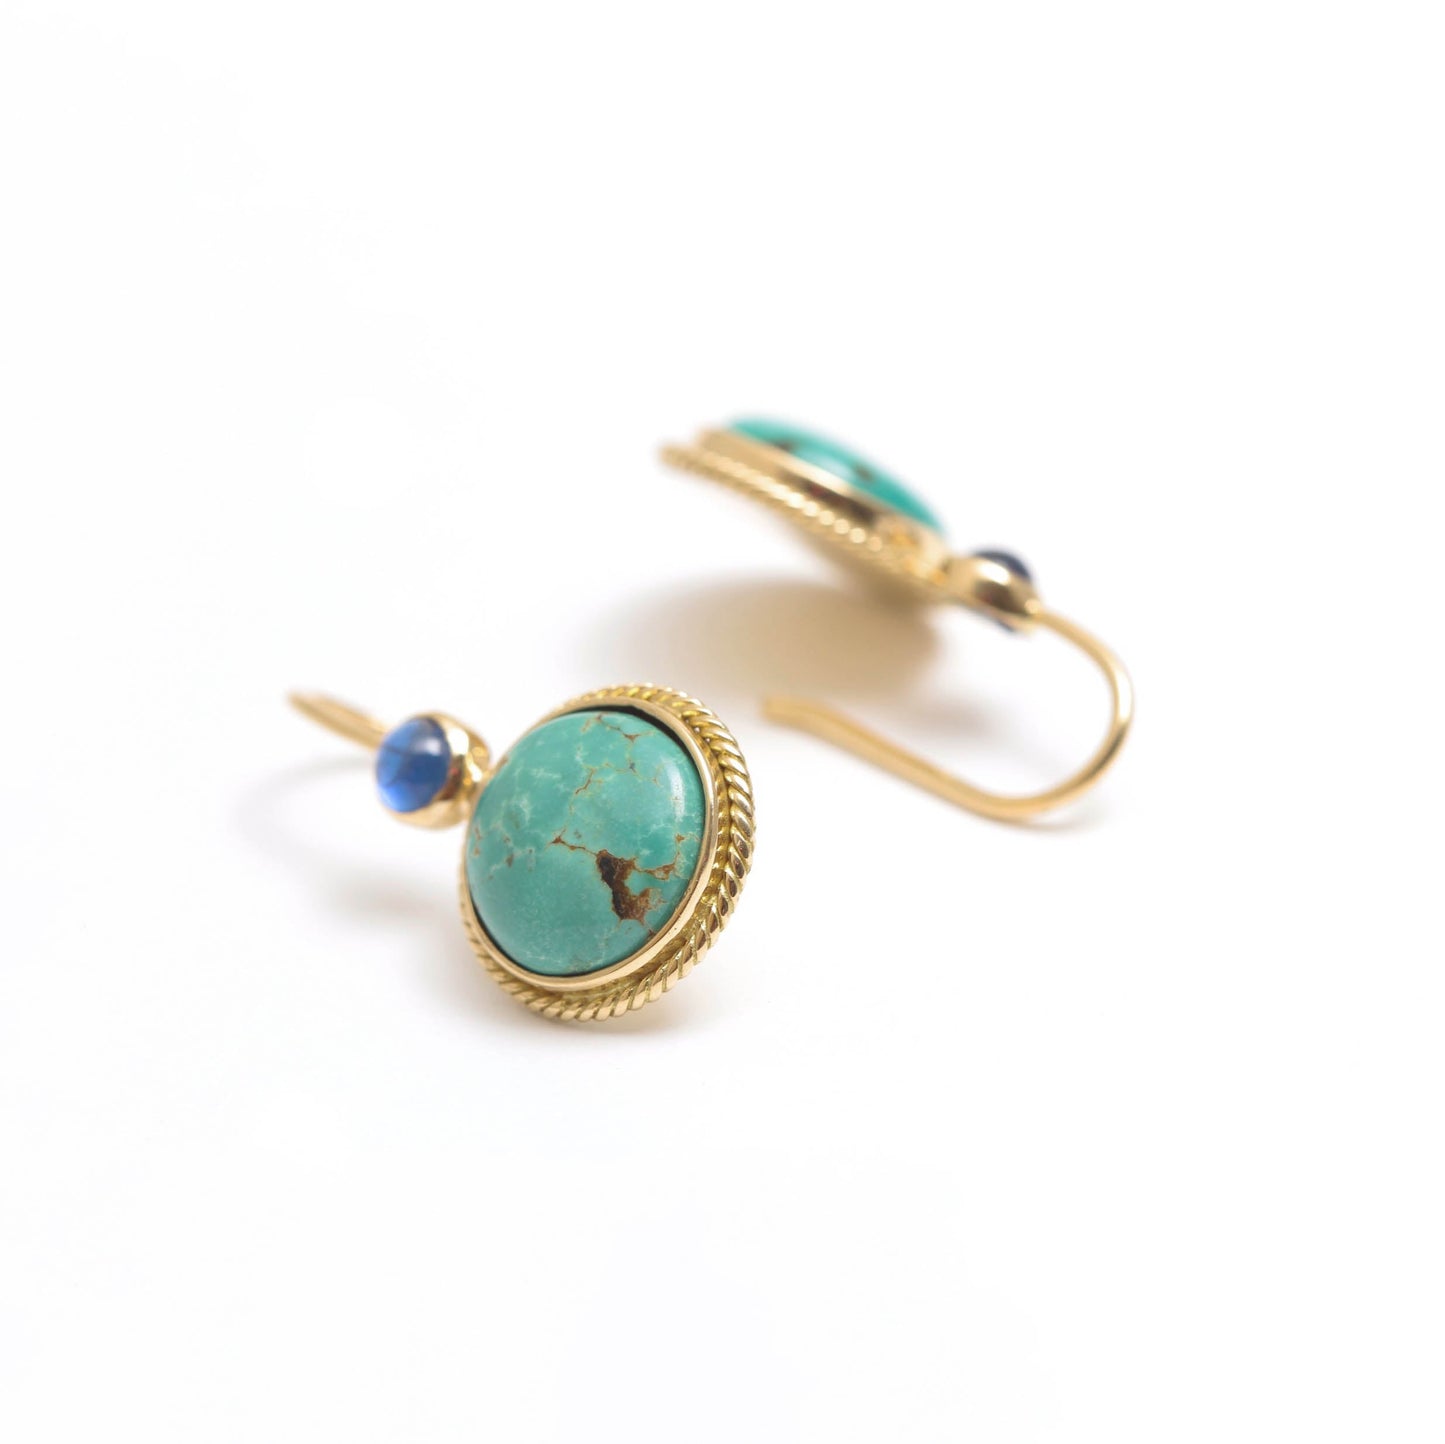 The Varsha Gold, Turquoise and Blue Sapphire Hook Earrings by Rasvihar